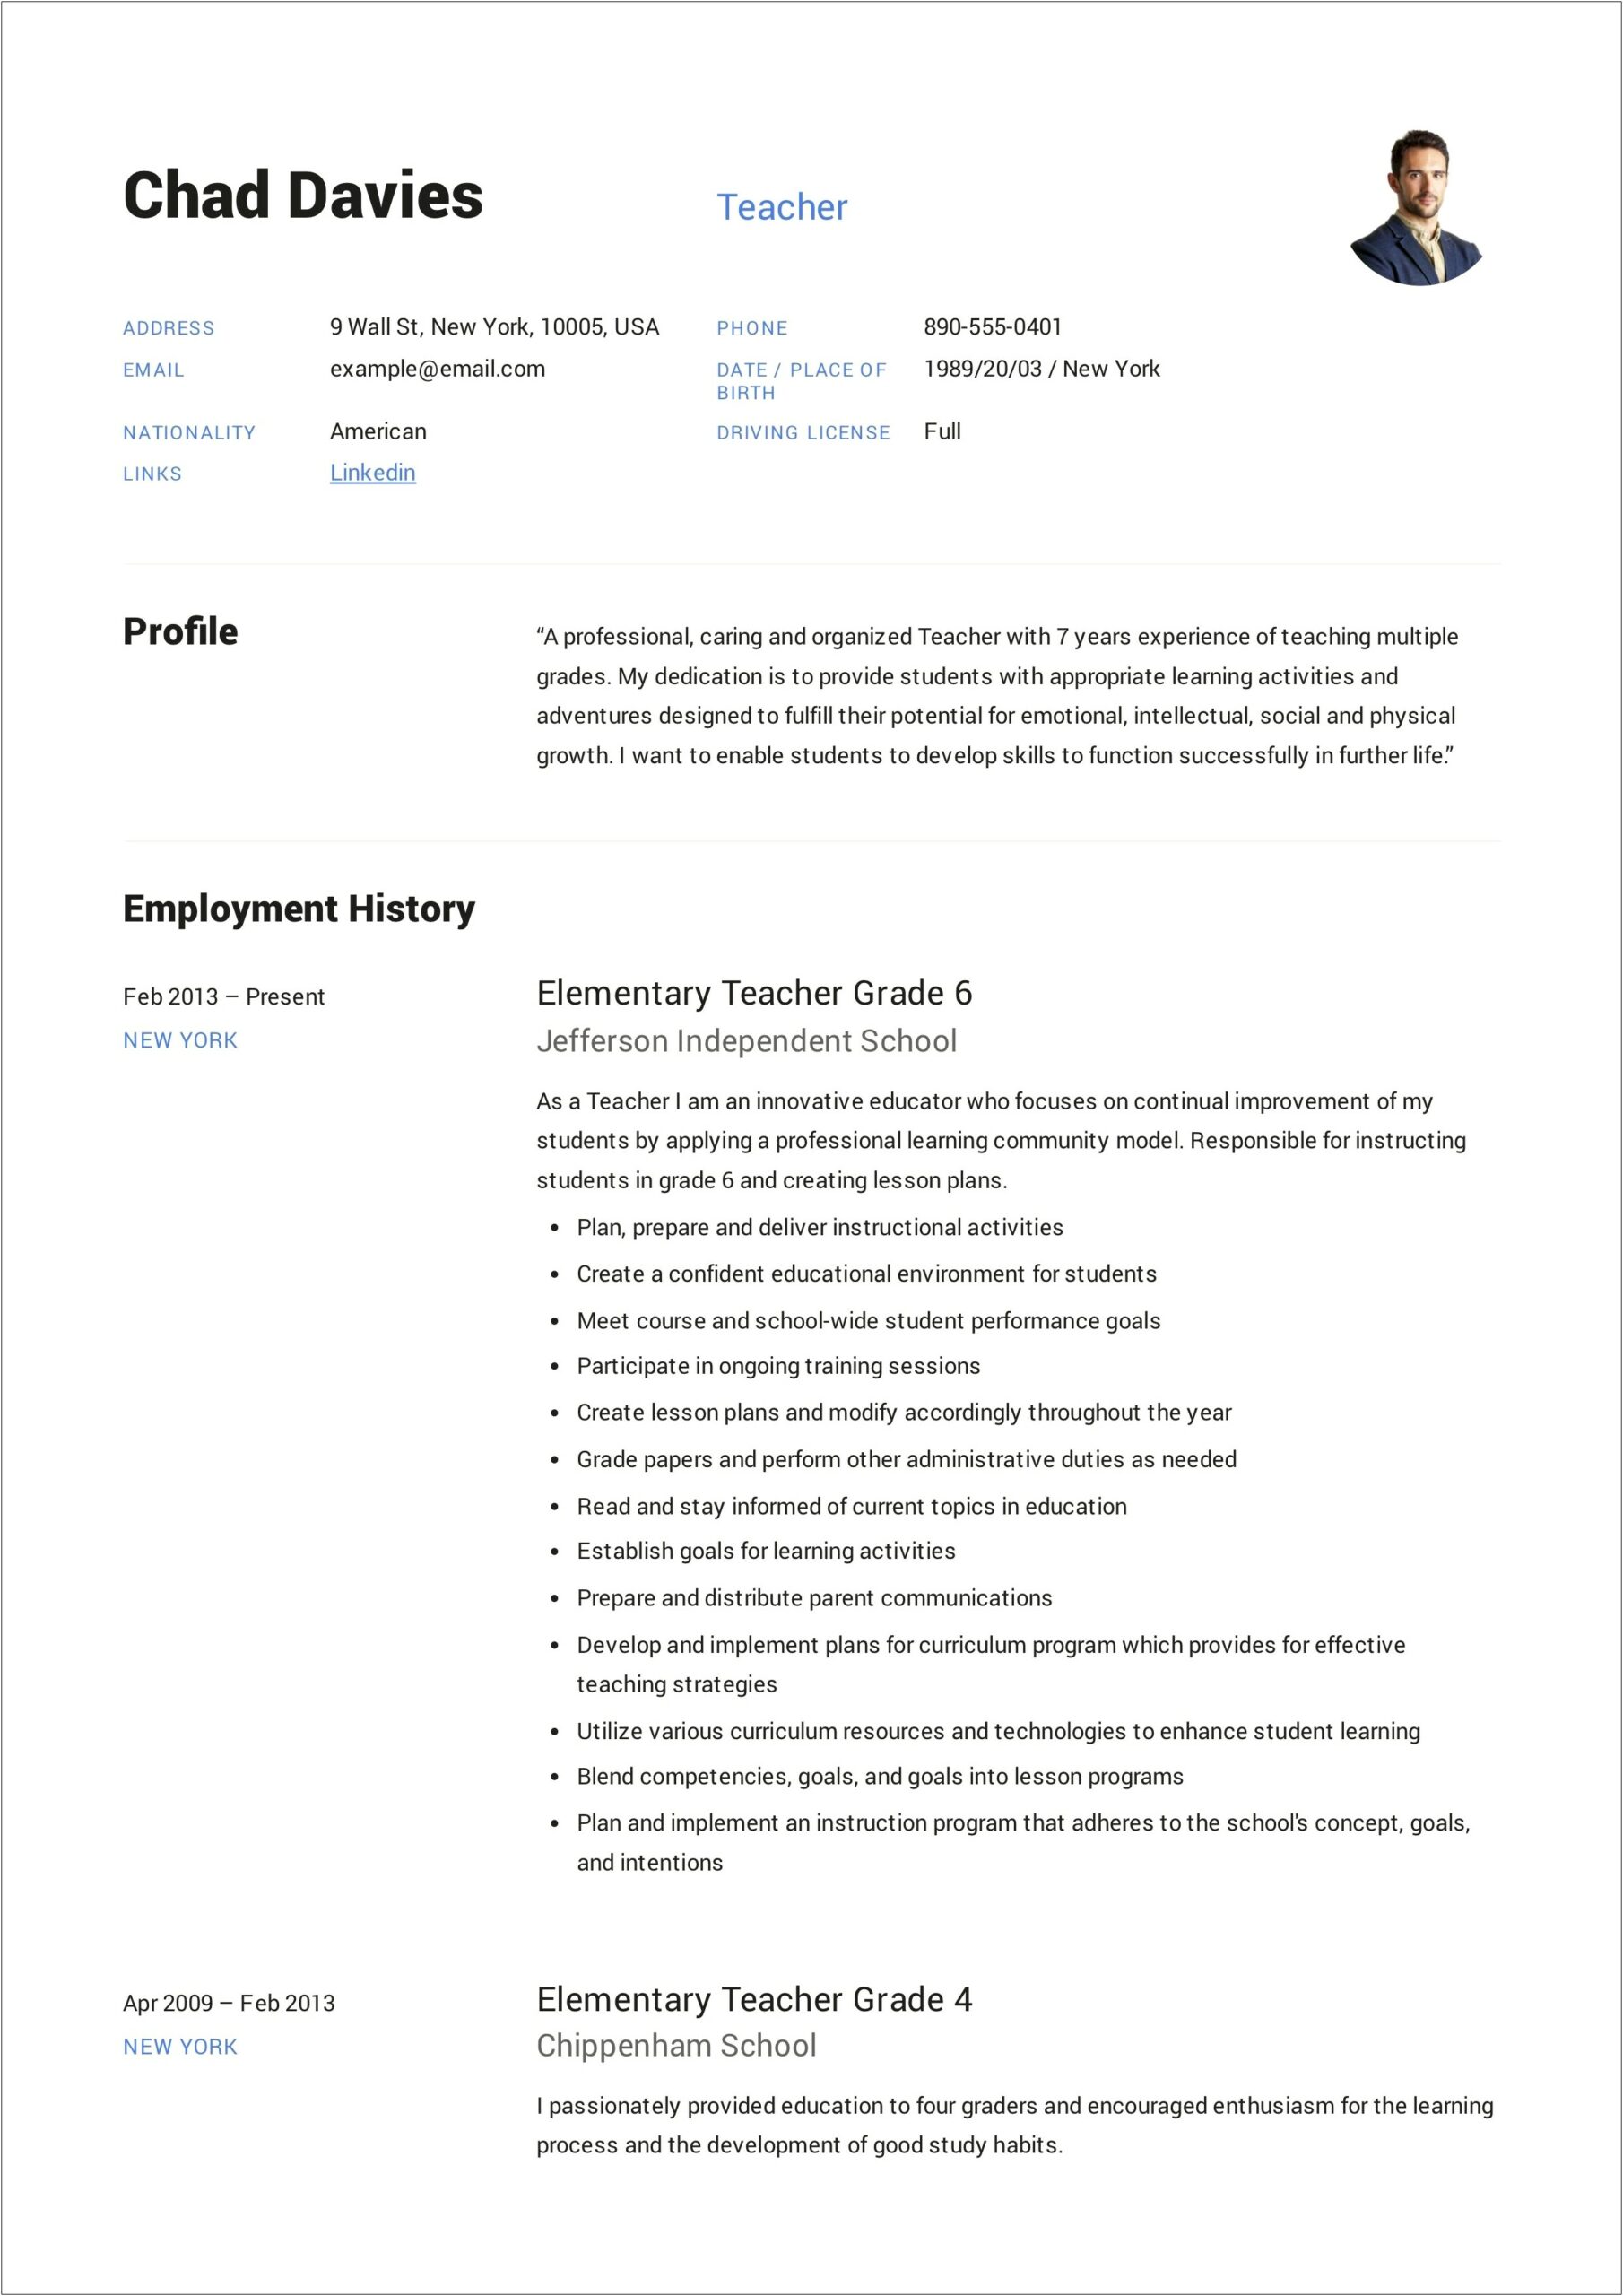 Engineer To Middle School To Math Teacher Resume